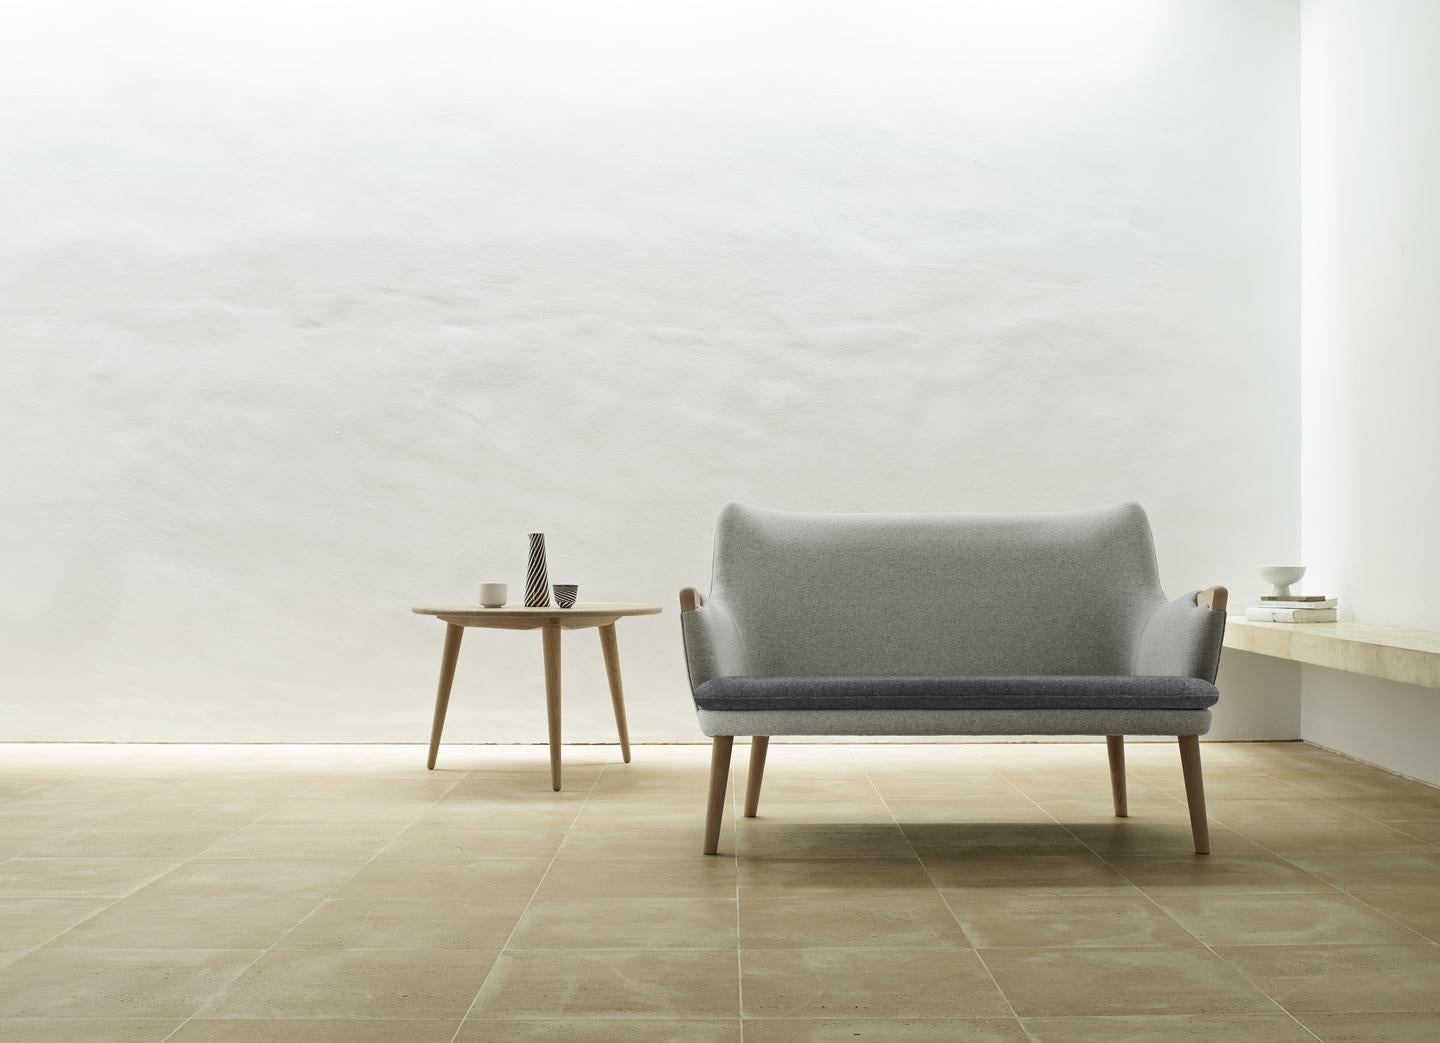 CH72 SOFA By Hans J. Wegner for Carl Hansen & Son

Hans J. Wegner designed the CH72 sofa in 1952, drawing on expertise in cabinetmaking and upholstery. The result is a finely crafted, fluid design that appears as striking today as it did over half